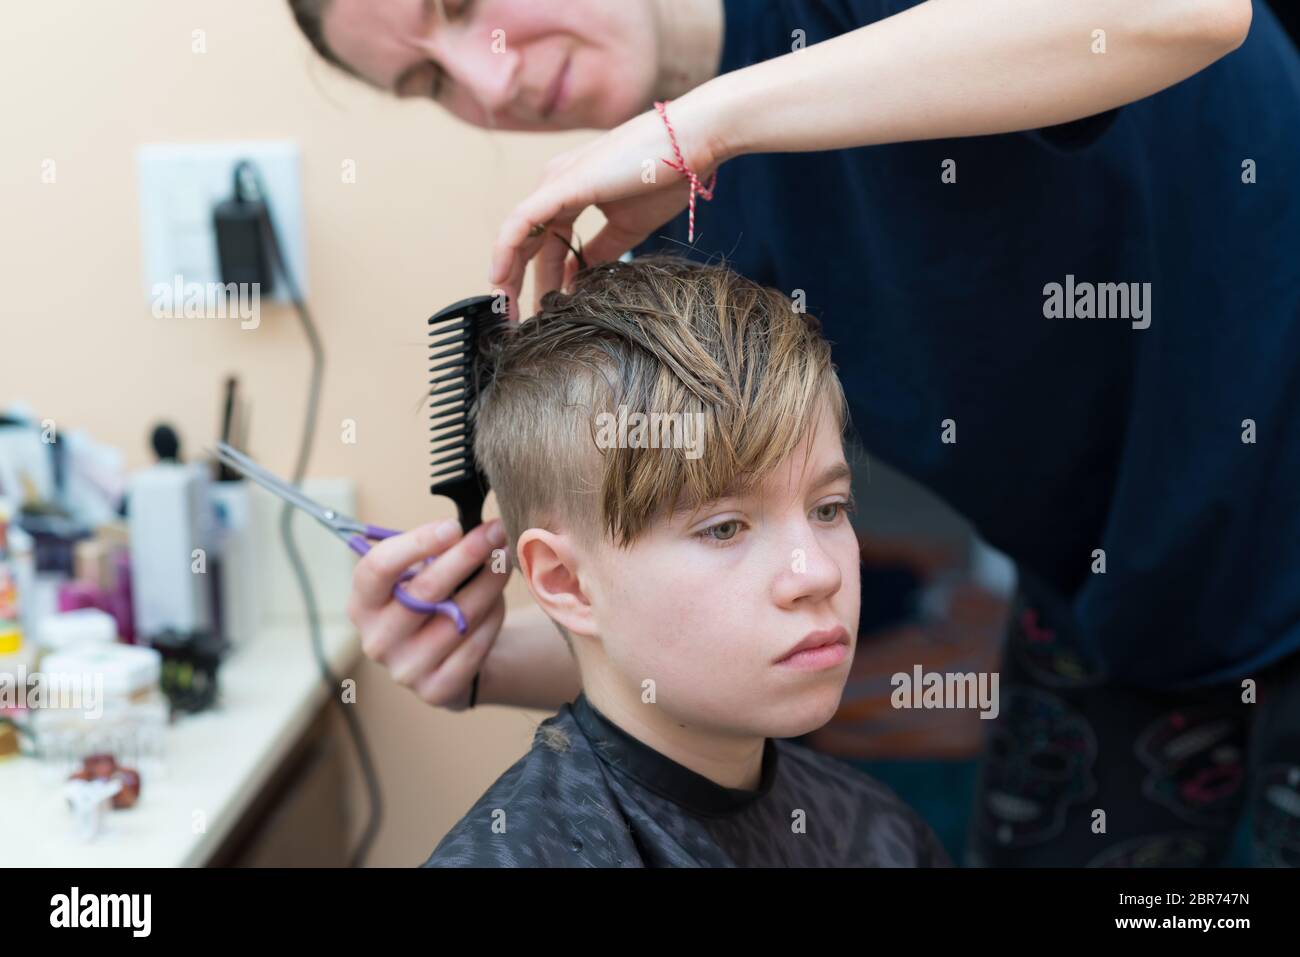 Mom cuts the hair of her son at home during quarantine amid COVID-19  coronavirus pandemic Stock Photo